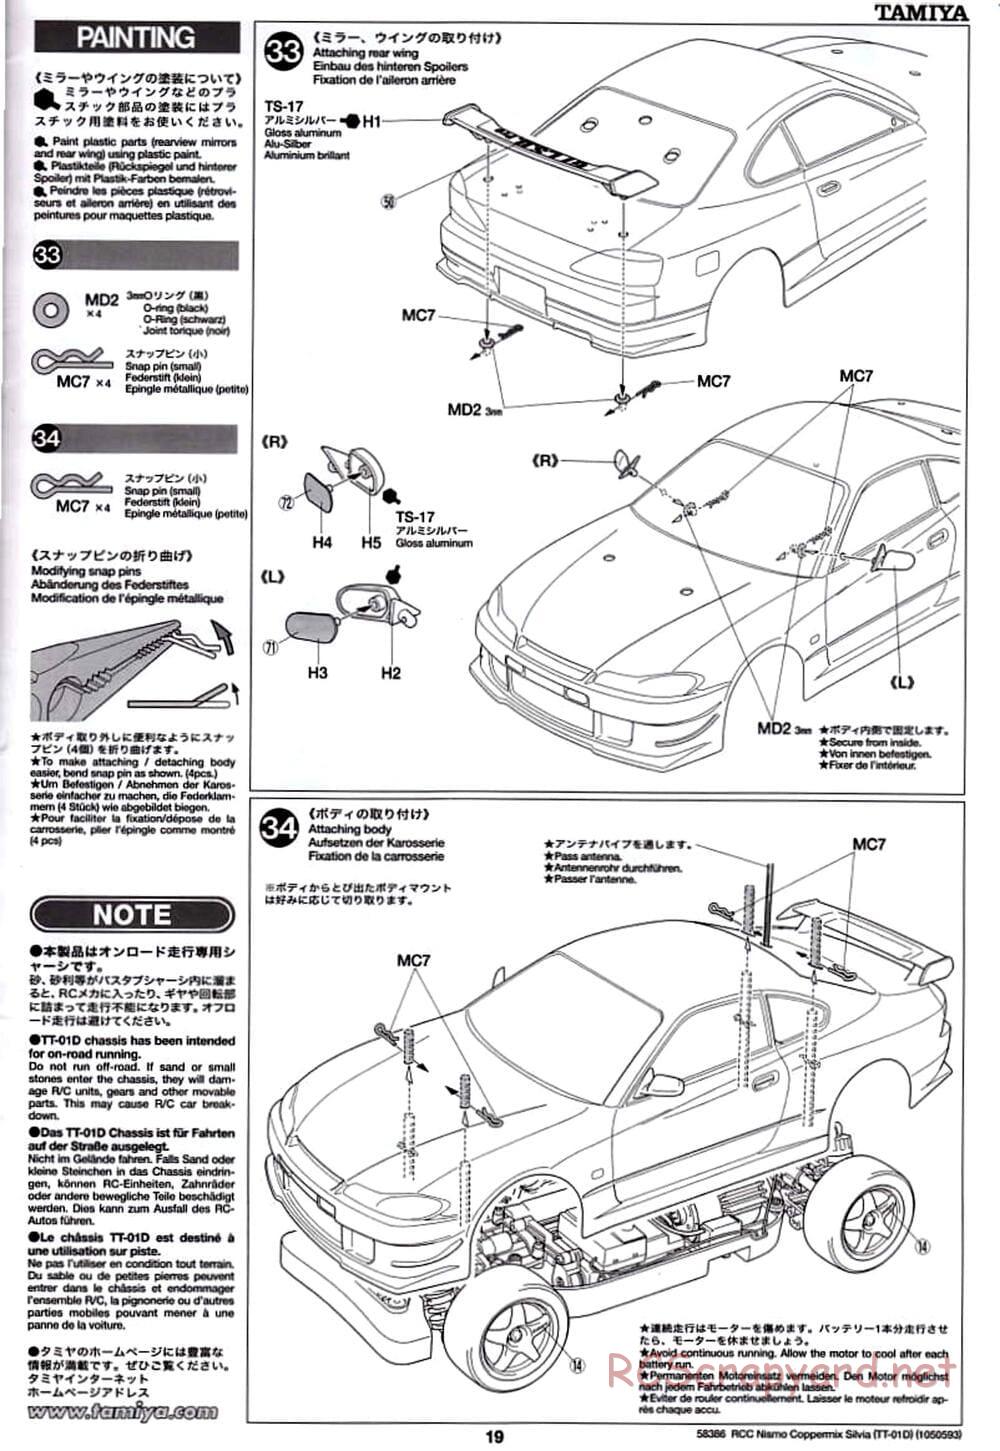 Tamiya - Nismo Coppermix Silvia Drift Spec - TT-01D Chassis - Manual - Page 19